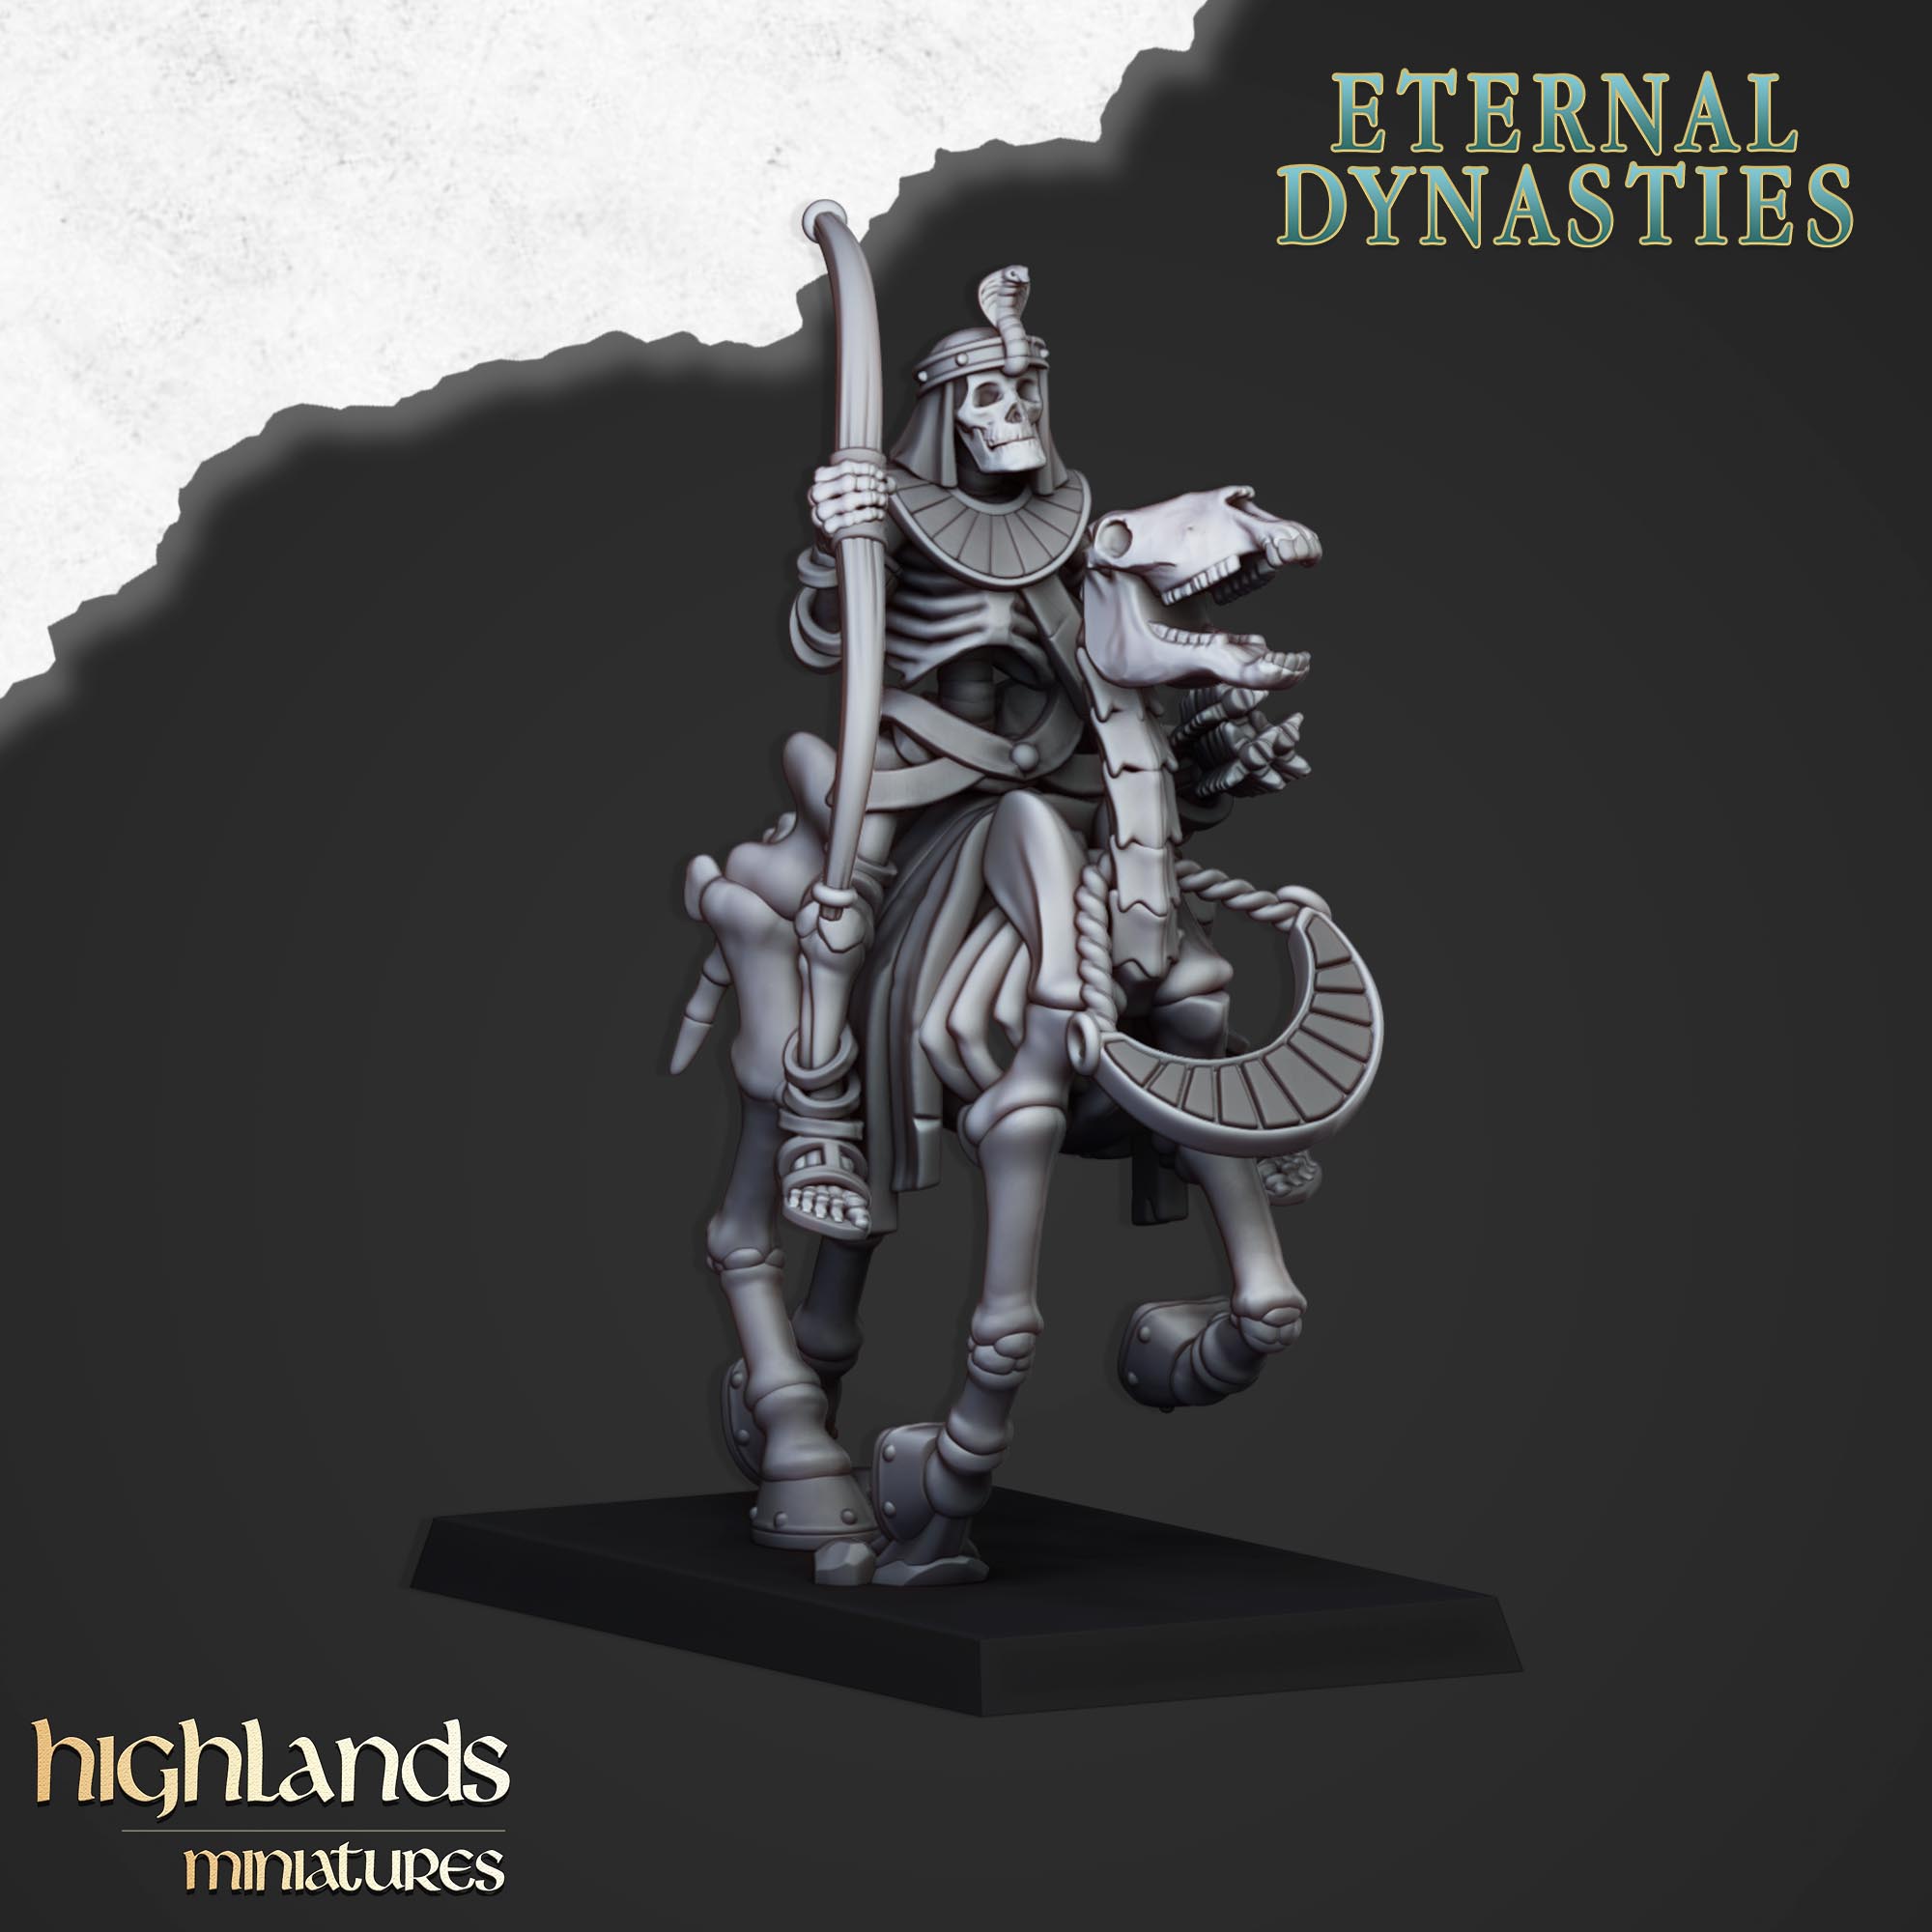 Ancient Skeletal Cavalry with Bows (x8) - Eternal Dynasties | Highlands Miniatures